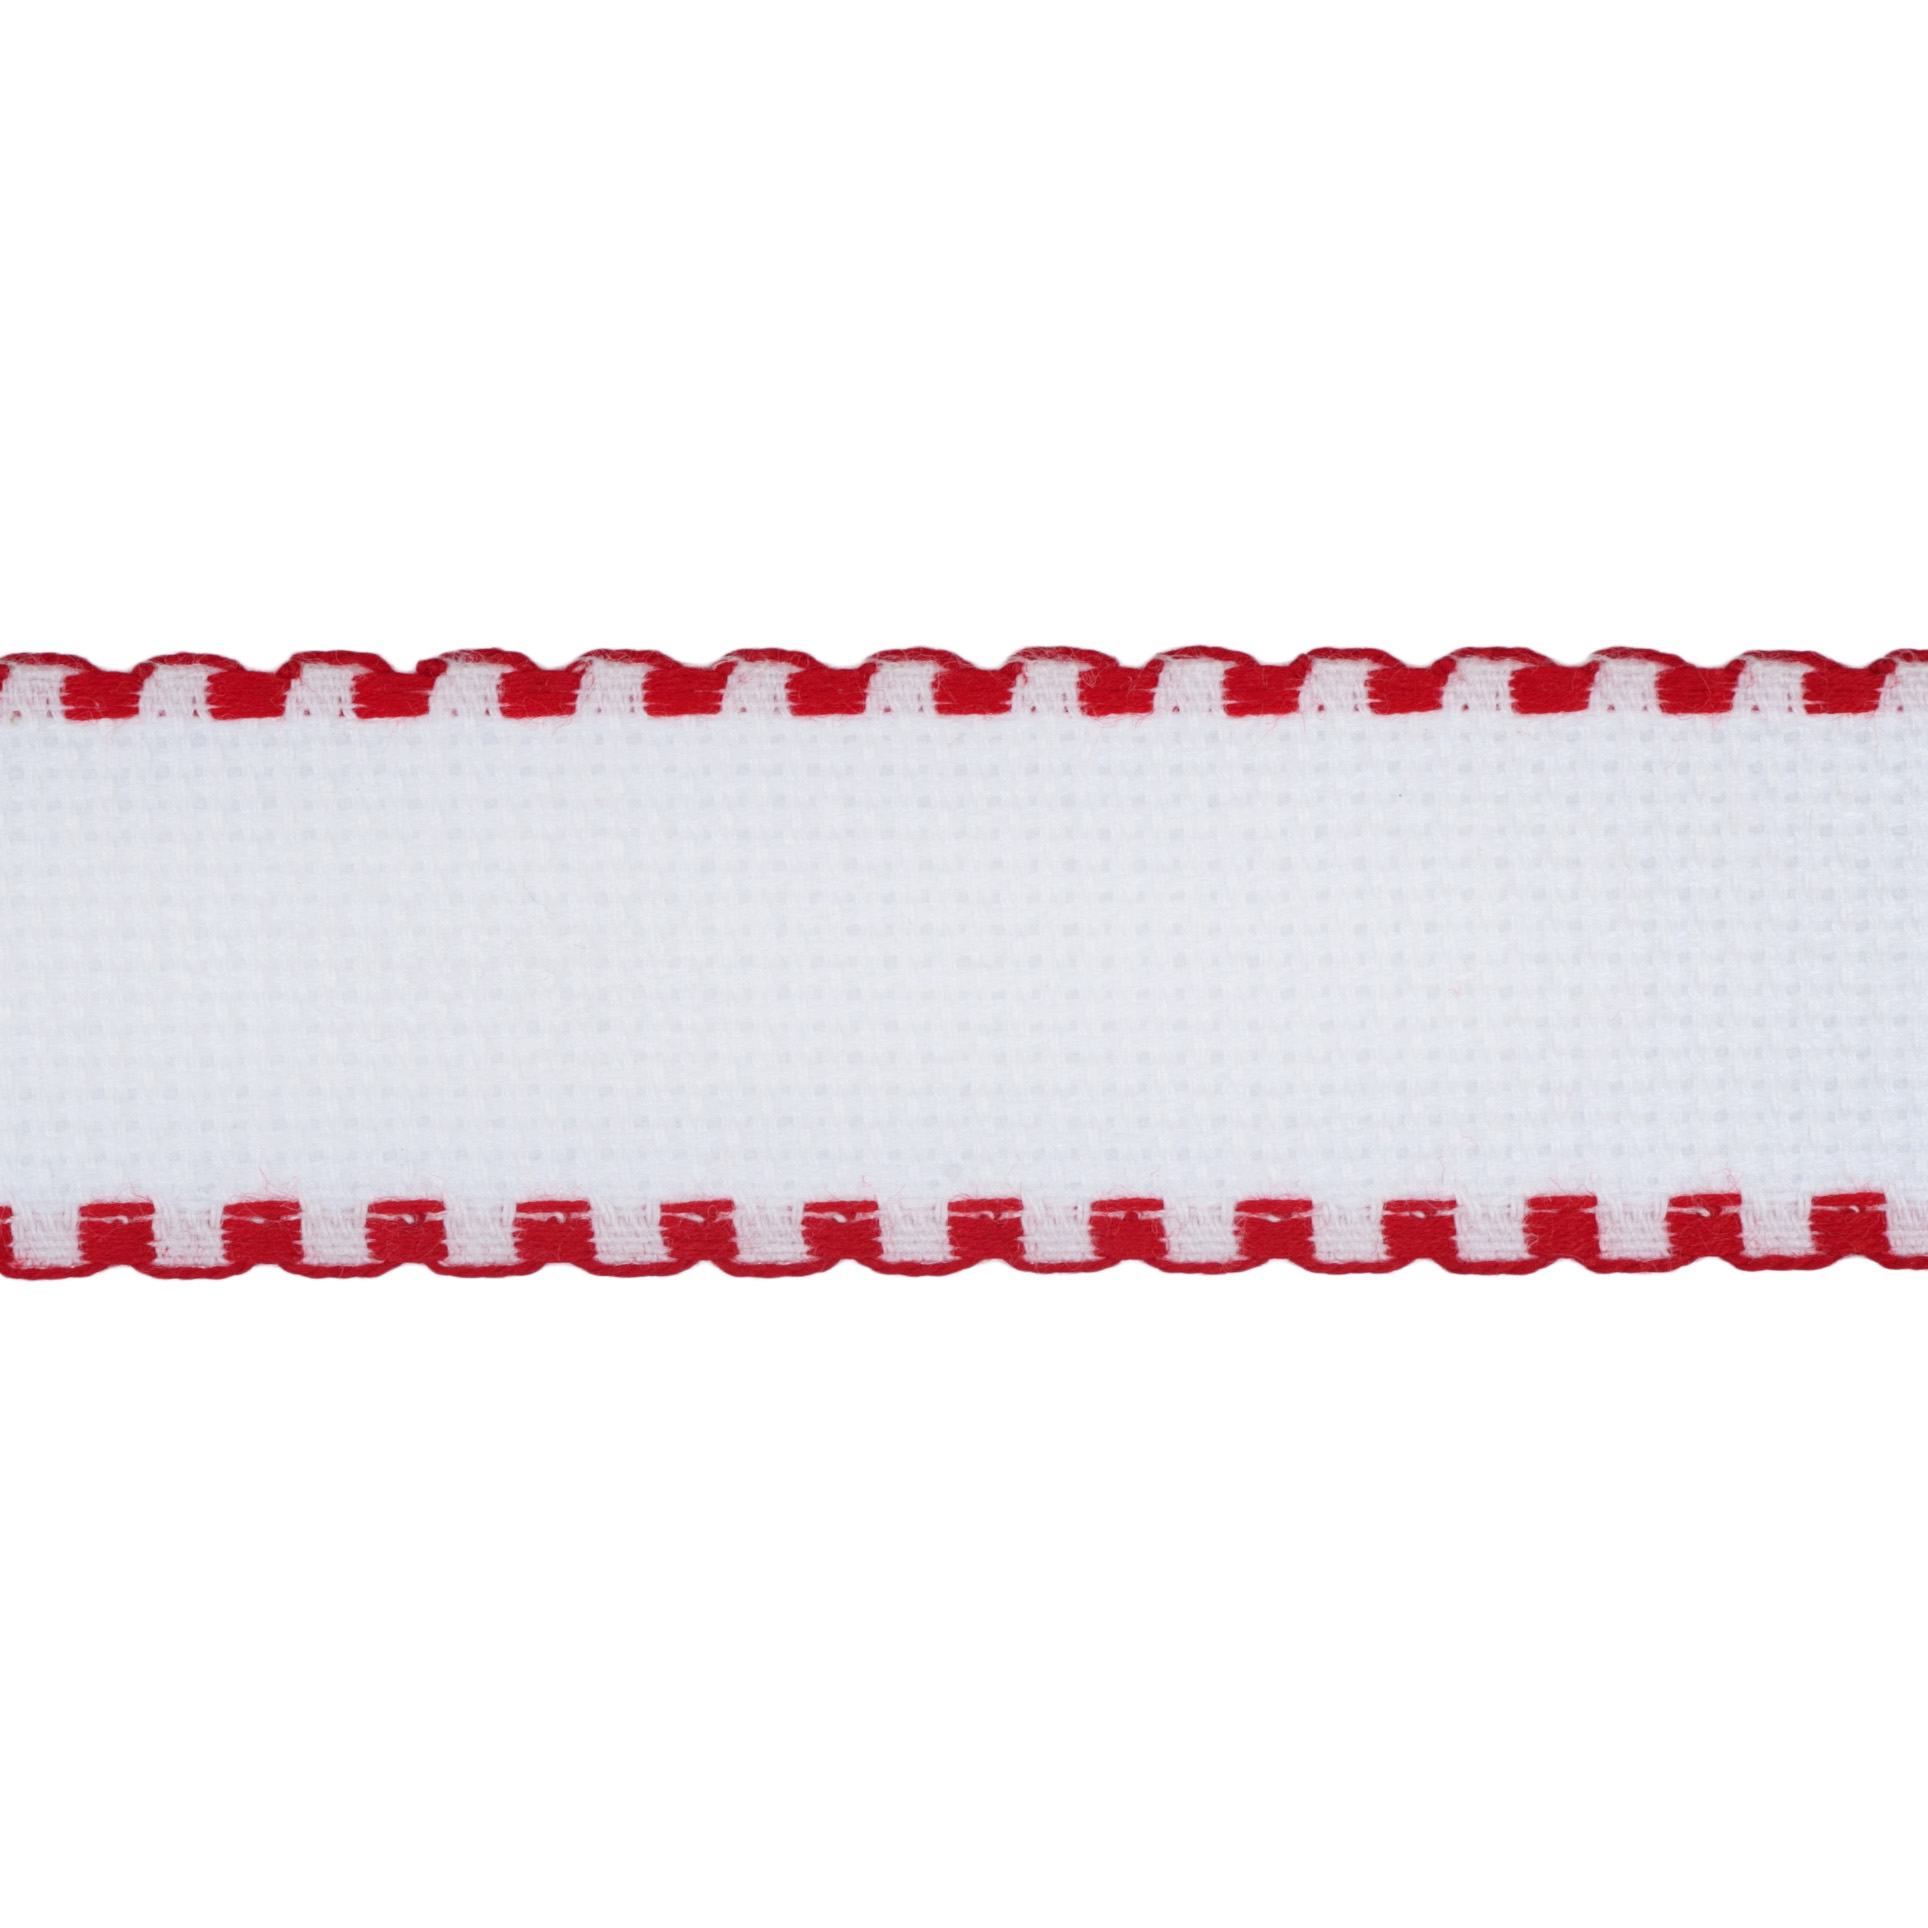 Picture of Needlecraft Fabric: Aida Band: 16 Count: 8m x 30mm: White/Red Edging